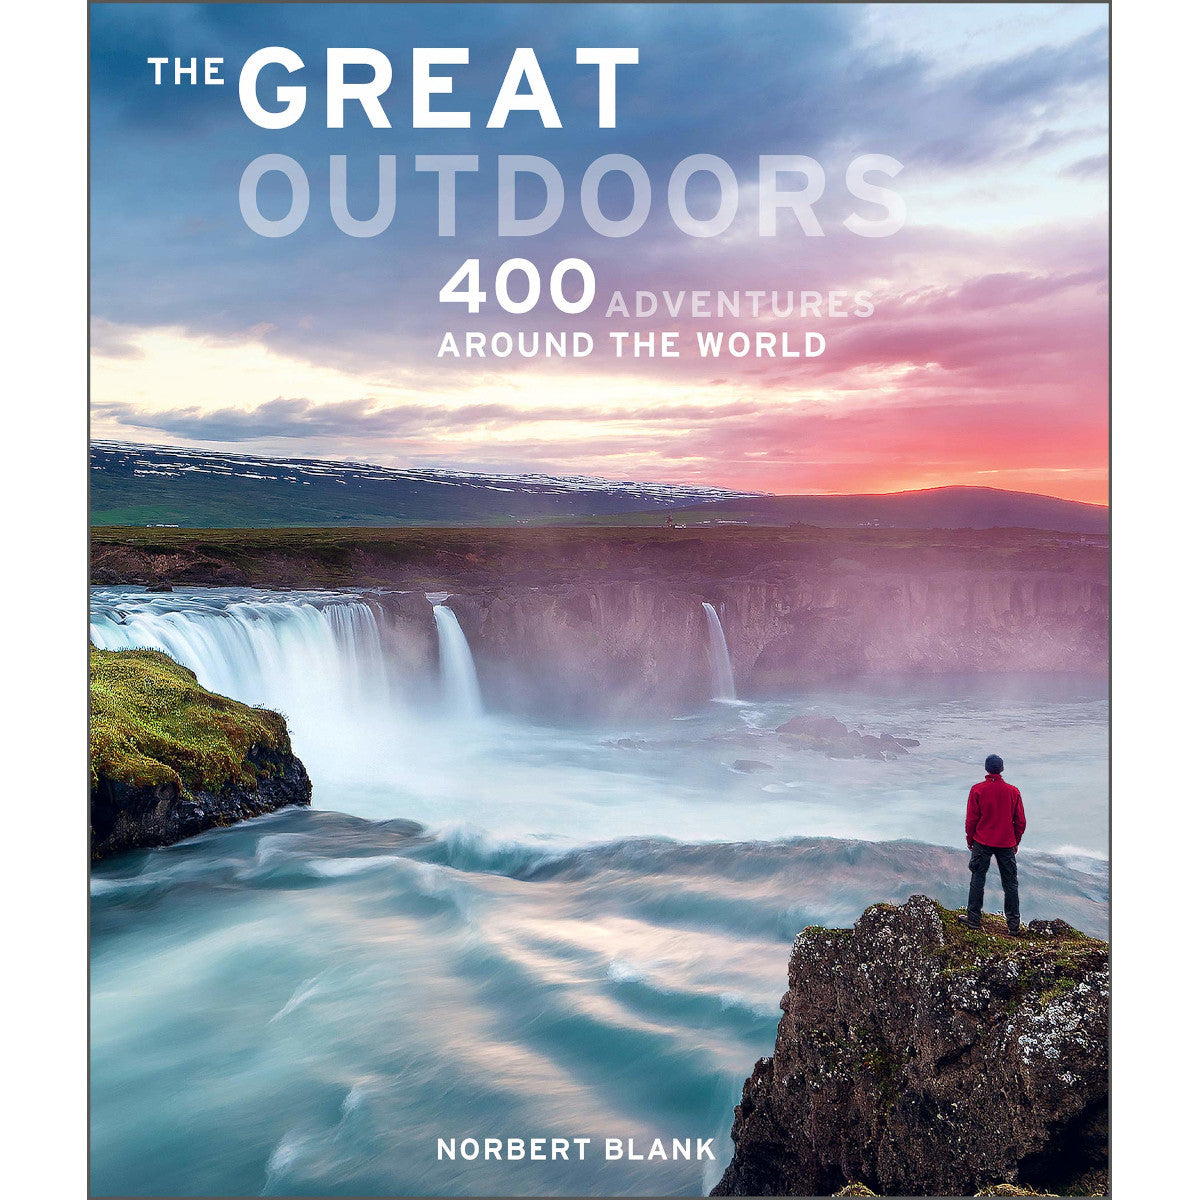 The Great Outdoors: 400 Adventures around the World